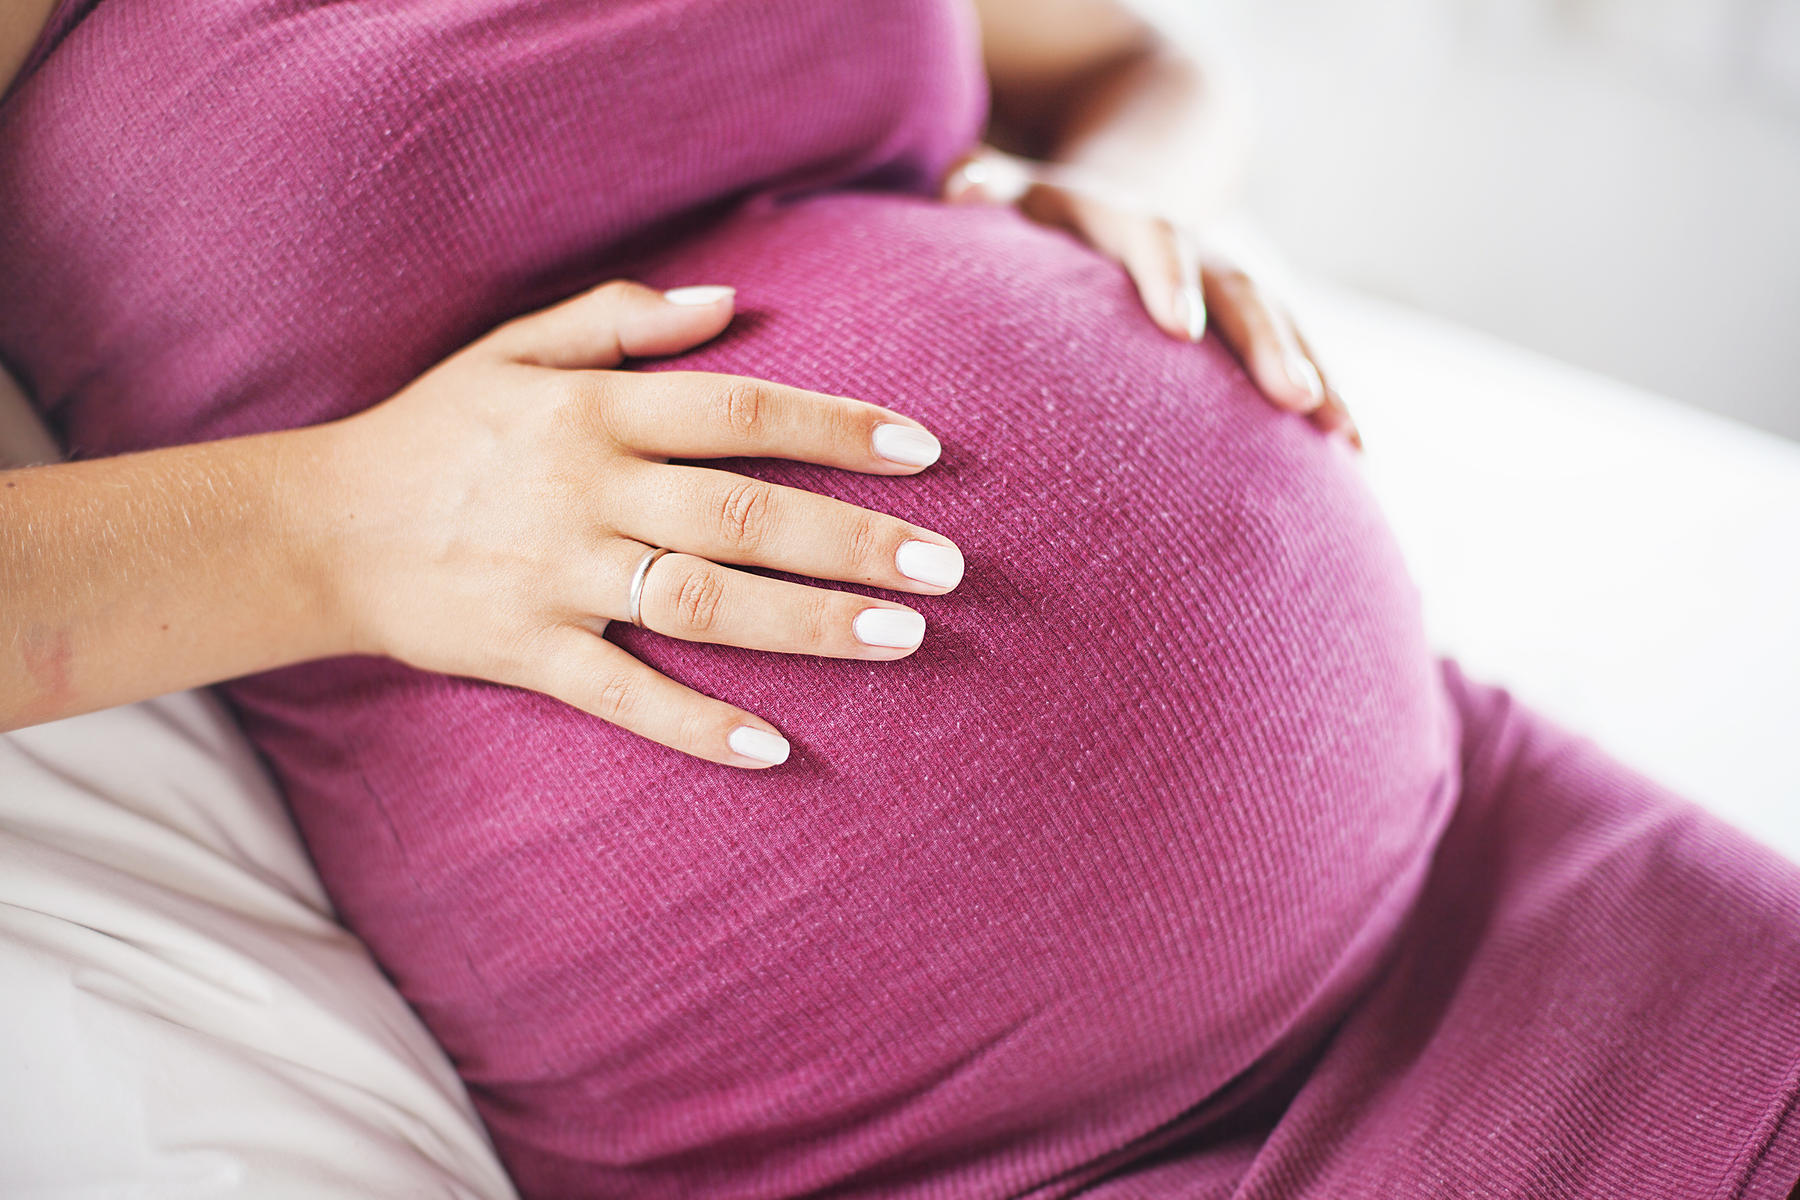 6 Natural Ways to Induce labor